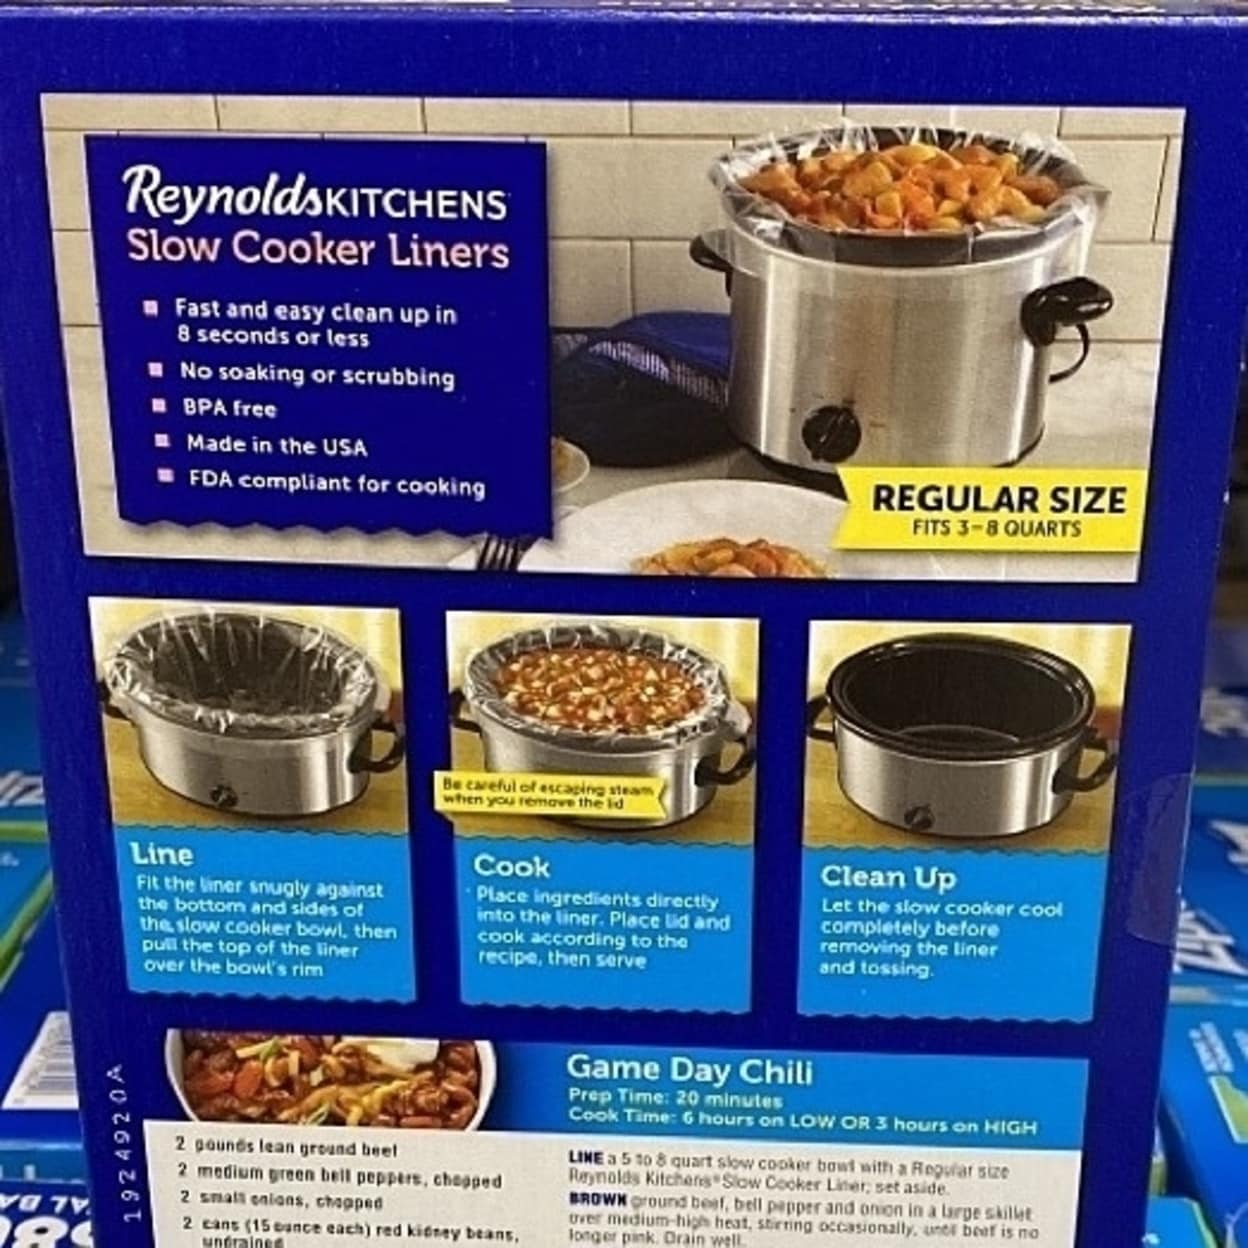 https://ak1.ostkcdn.com/images/products/is/images/direct/b2ccf54b2a7203ad4e2fd1da17f5bee9cfb7274e/Reynolds-Slow-Cooker-Liners%2C-24-Pack.jpg